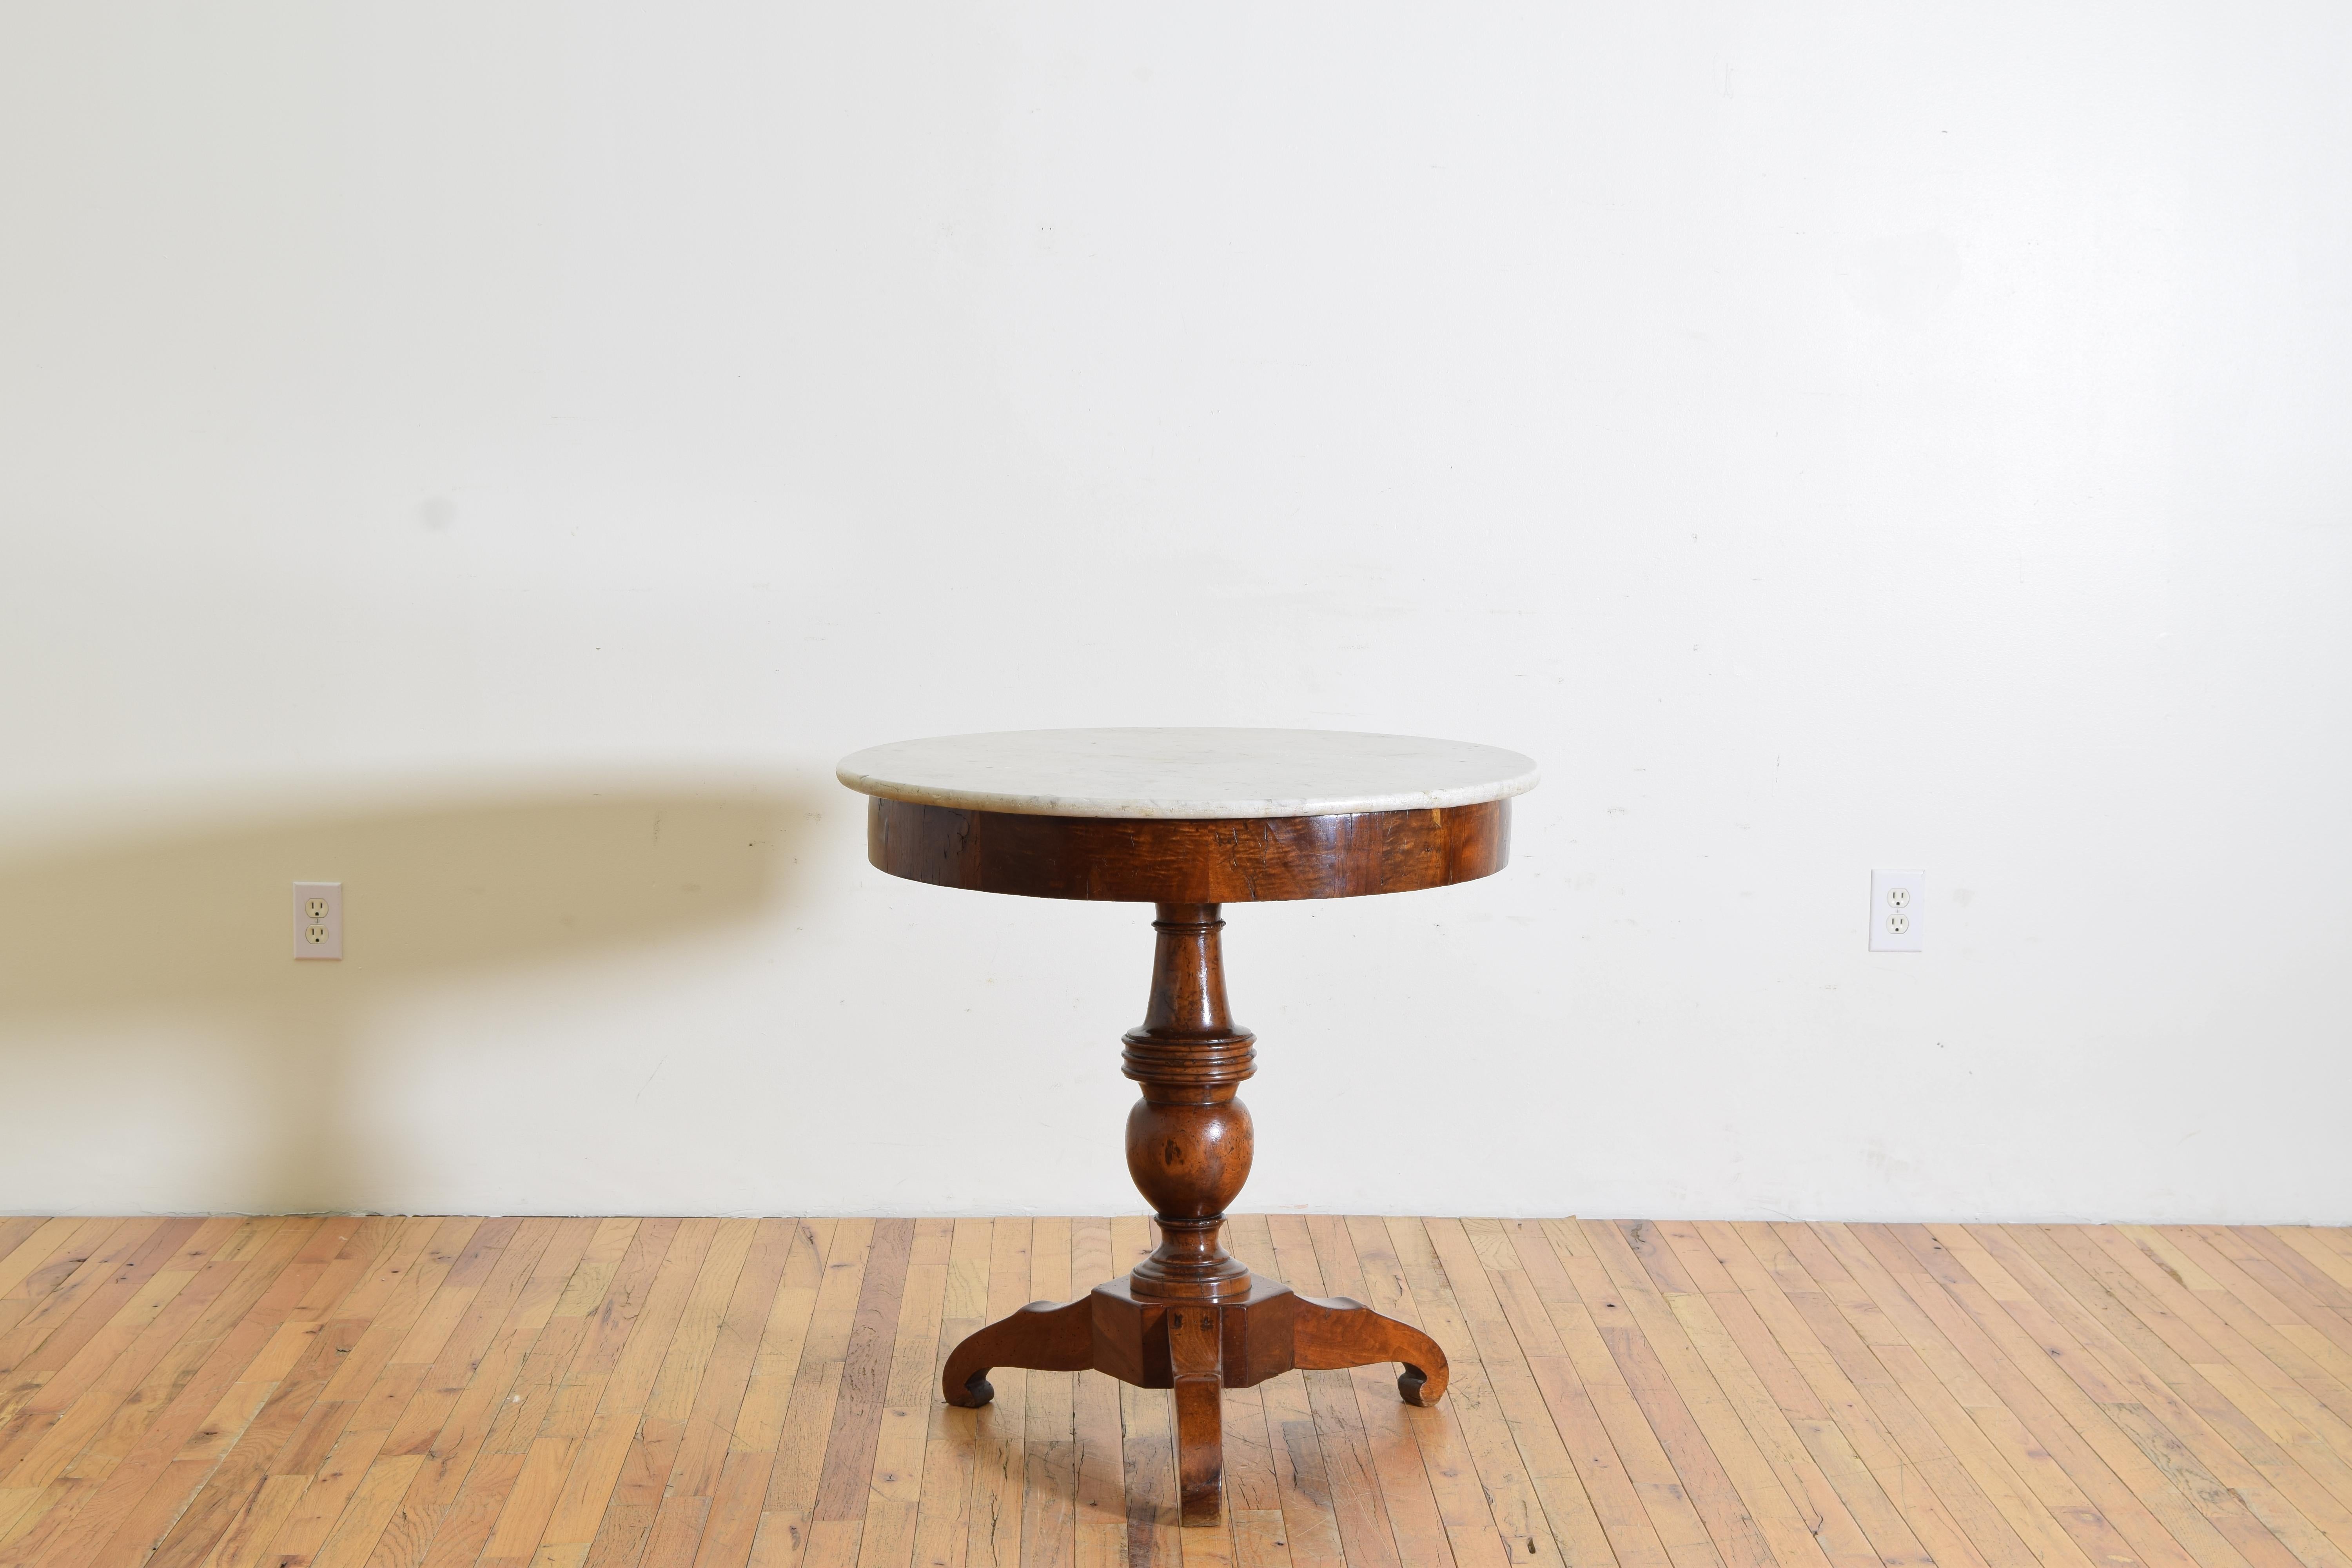 Having its original circular Carrara marble top above a conforming frame with veneered apron atop a solid walnut expertly turned standard resting on a hexagonal base issuing three shaped legs, the base and legs also of solid walnut